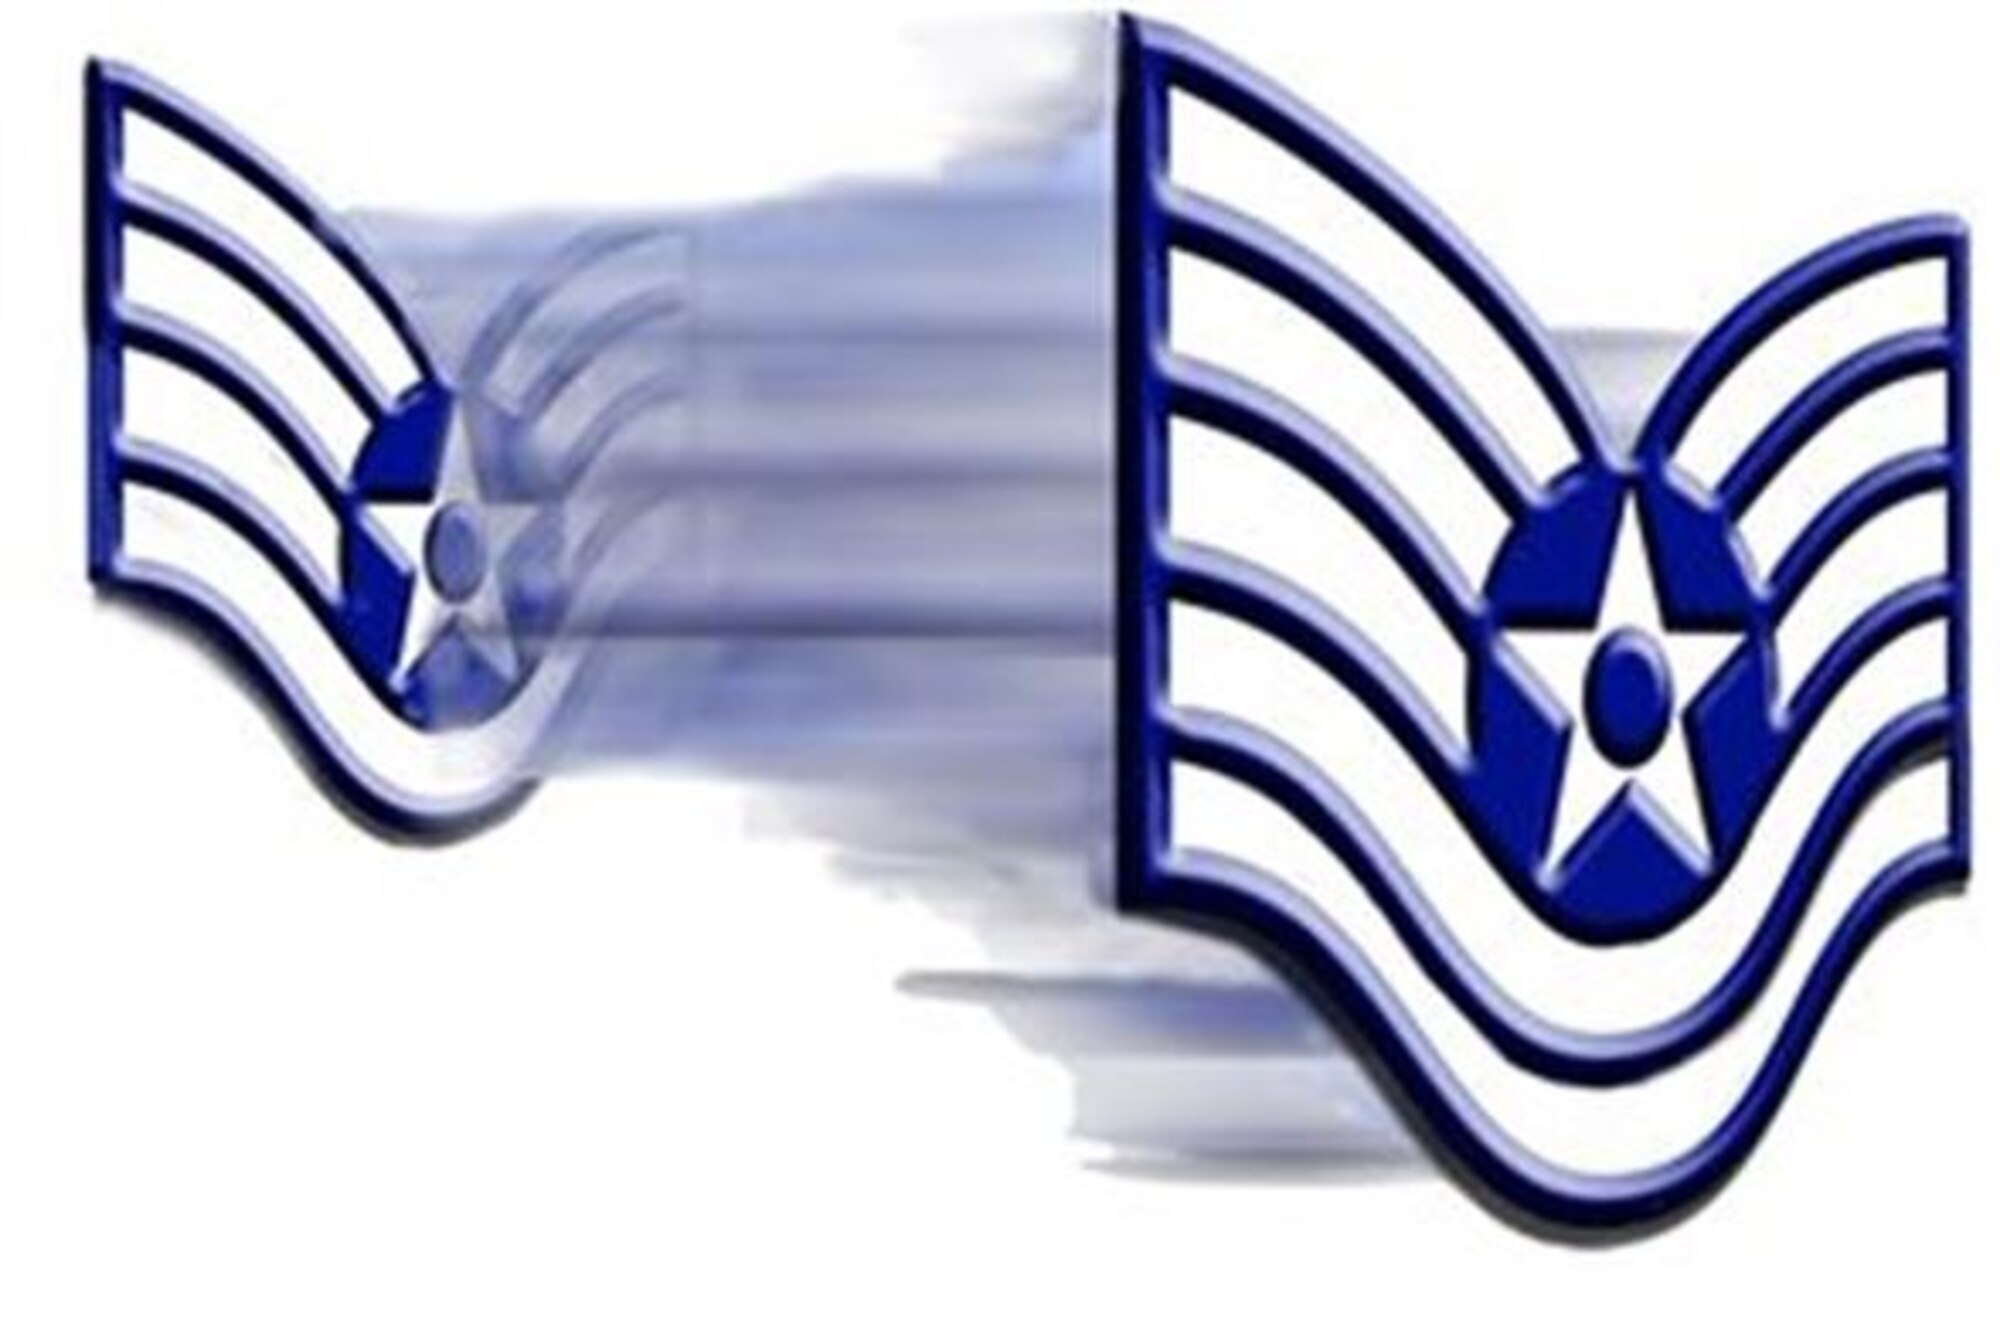 (Air Force Graphic)